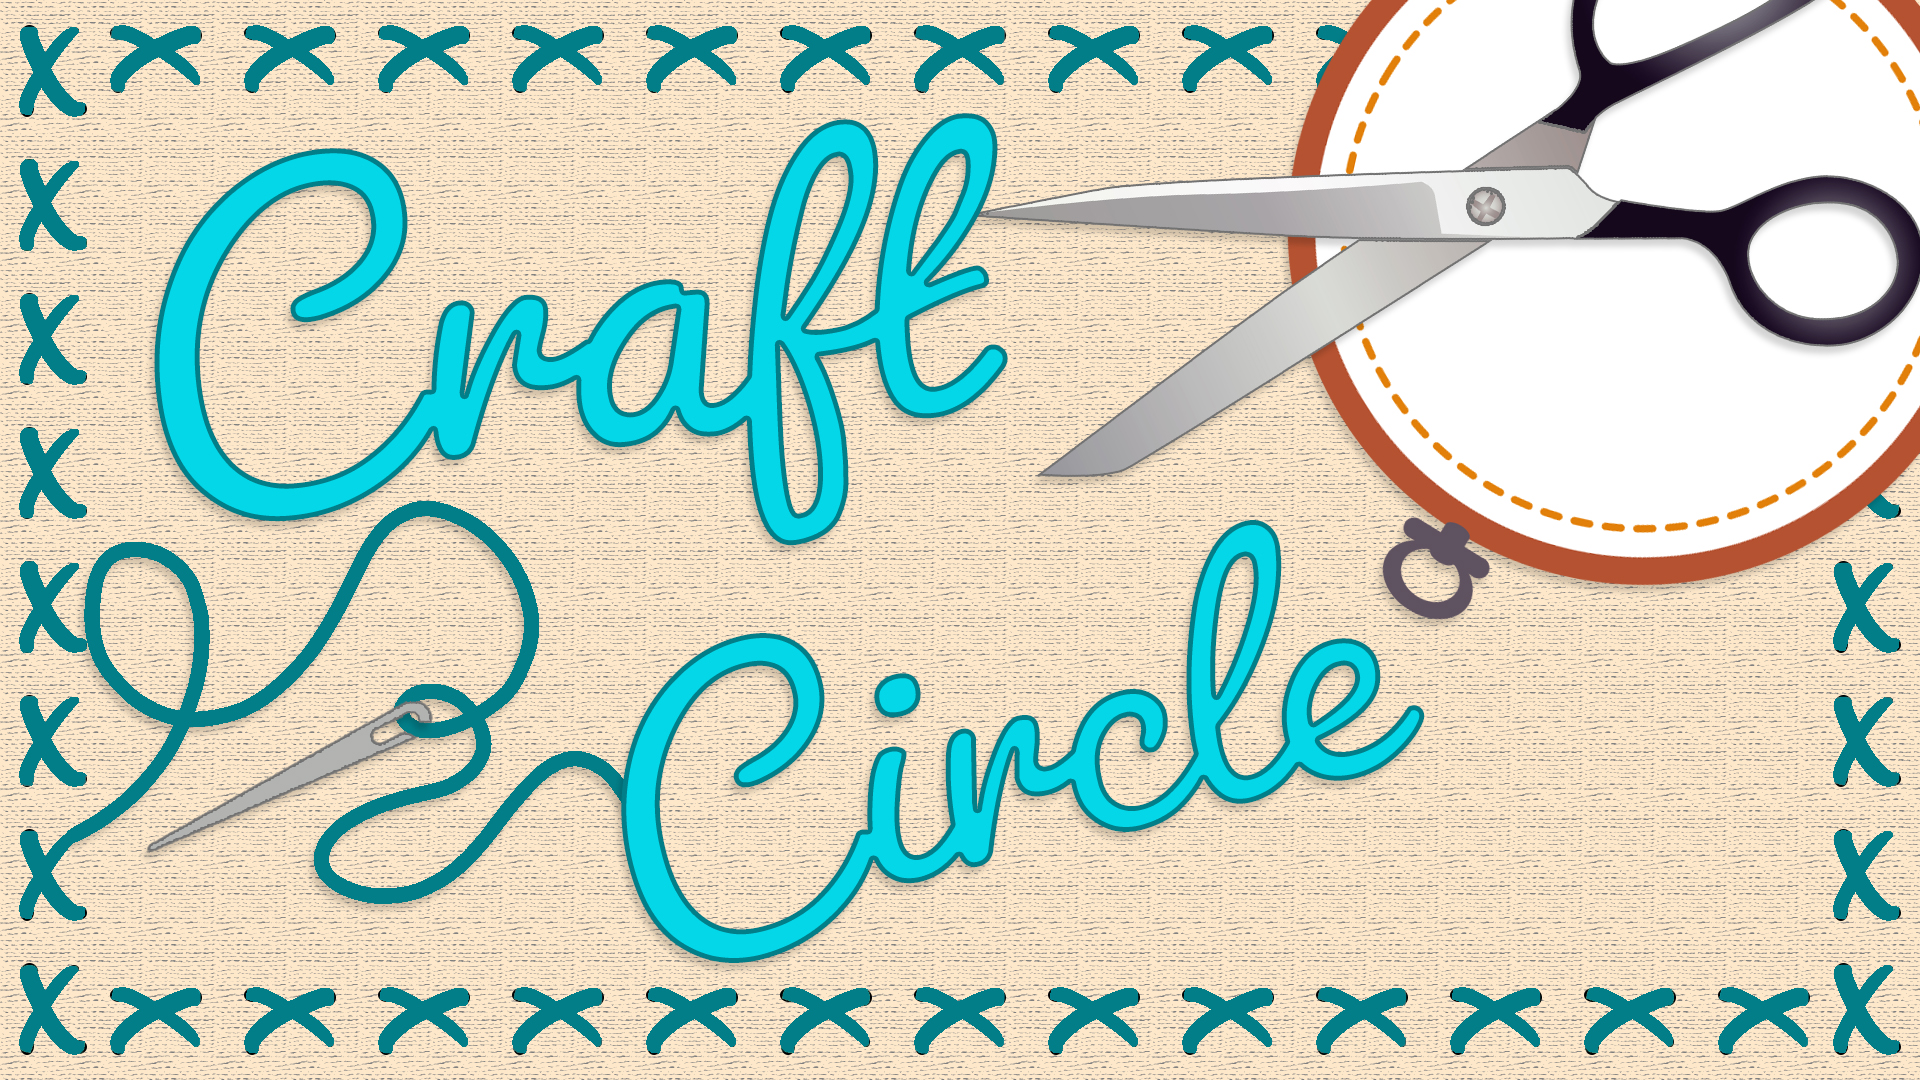 Image reads "Craft Circle" in aqua script over a canvas background. Stiching creates a border around the image, with a needle and thread at the end in the bottom-left corner. An embroidery boop and scissors fill the top-right corner.